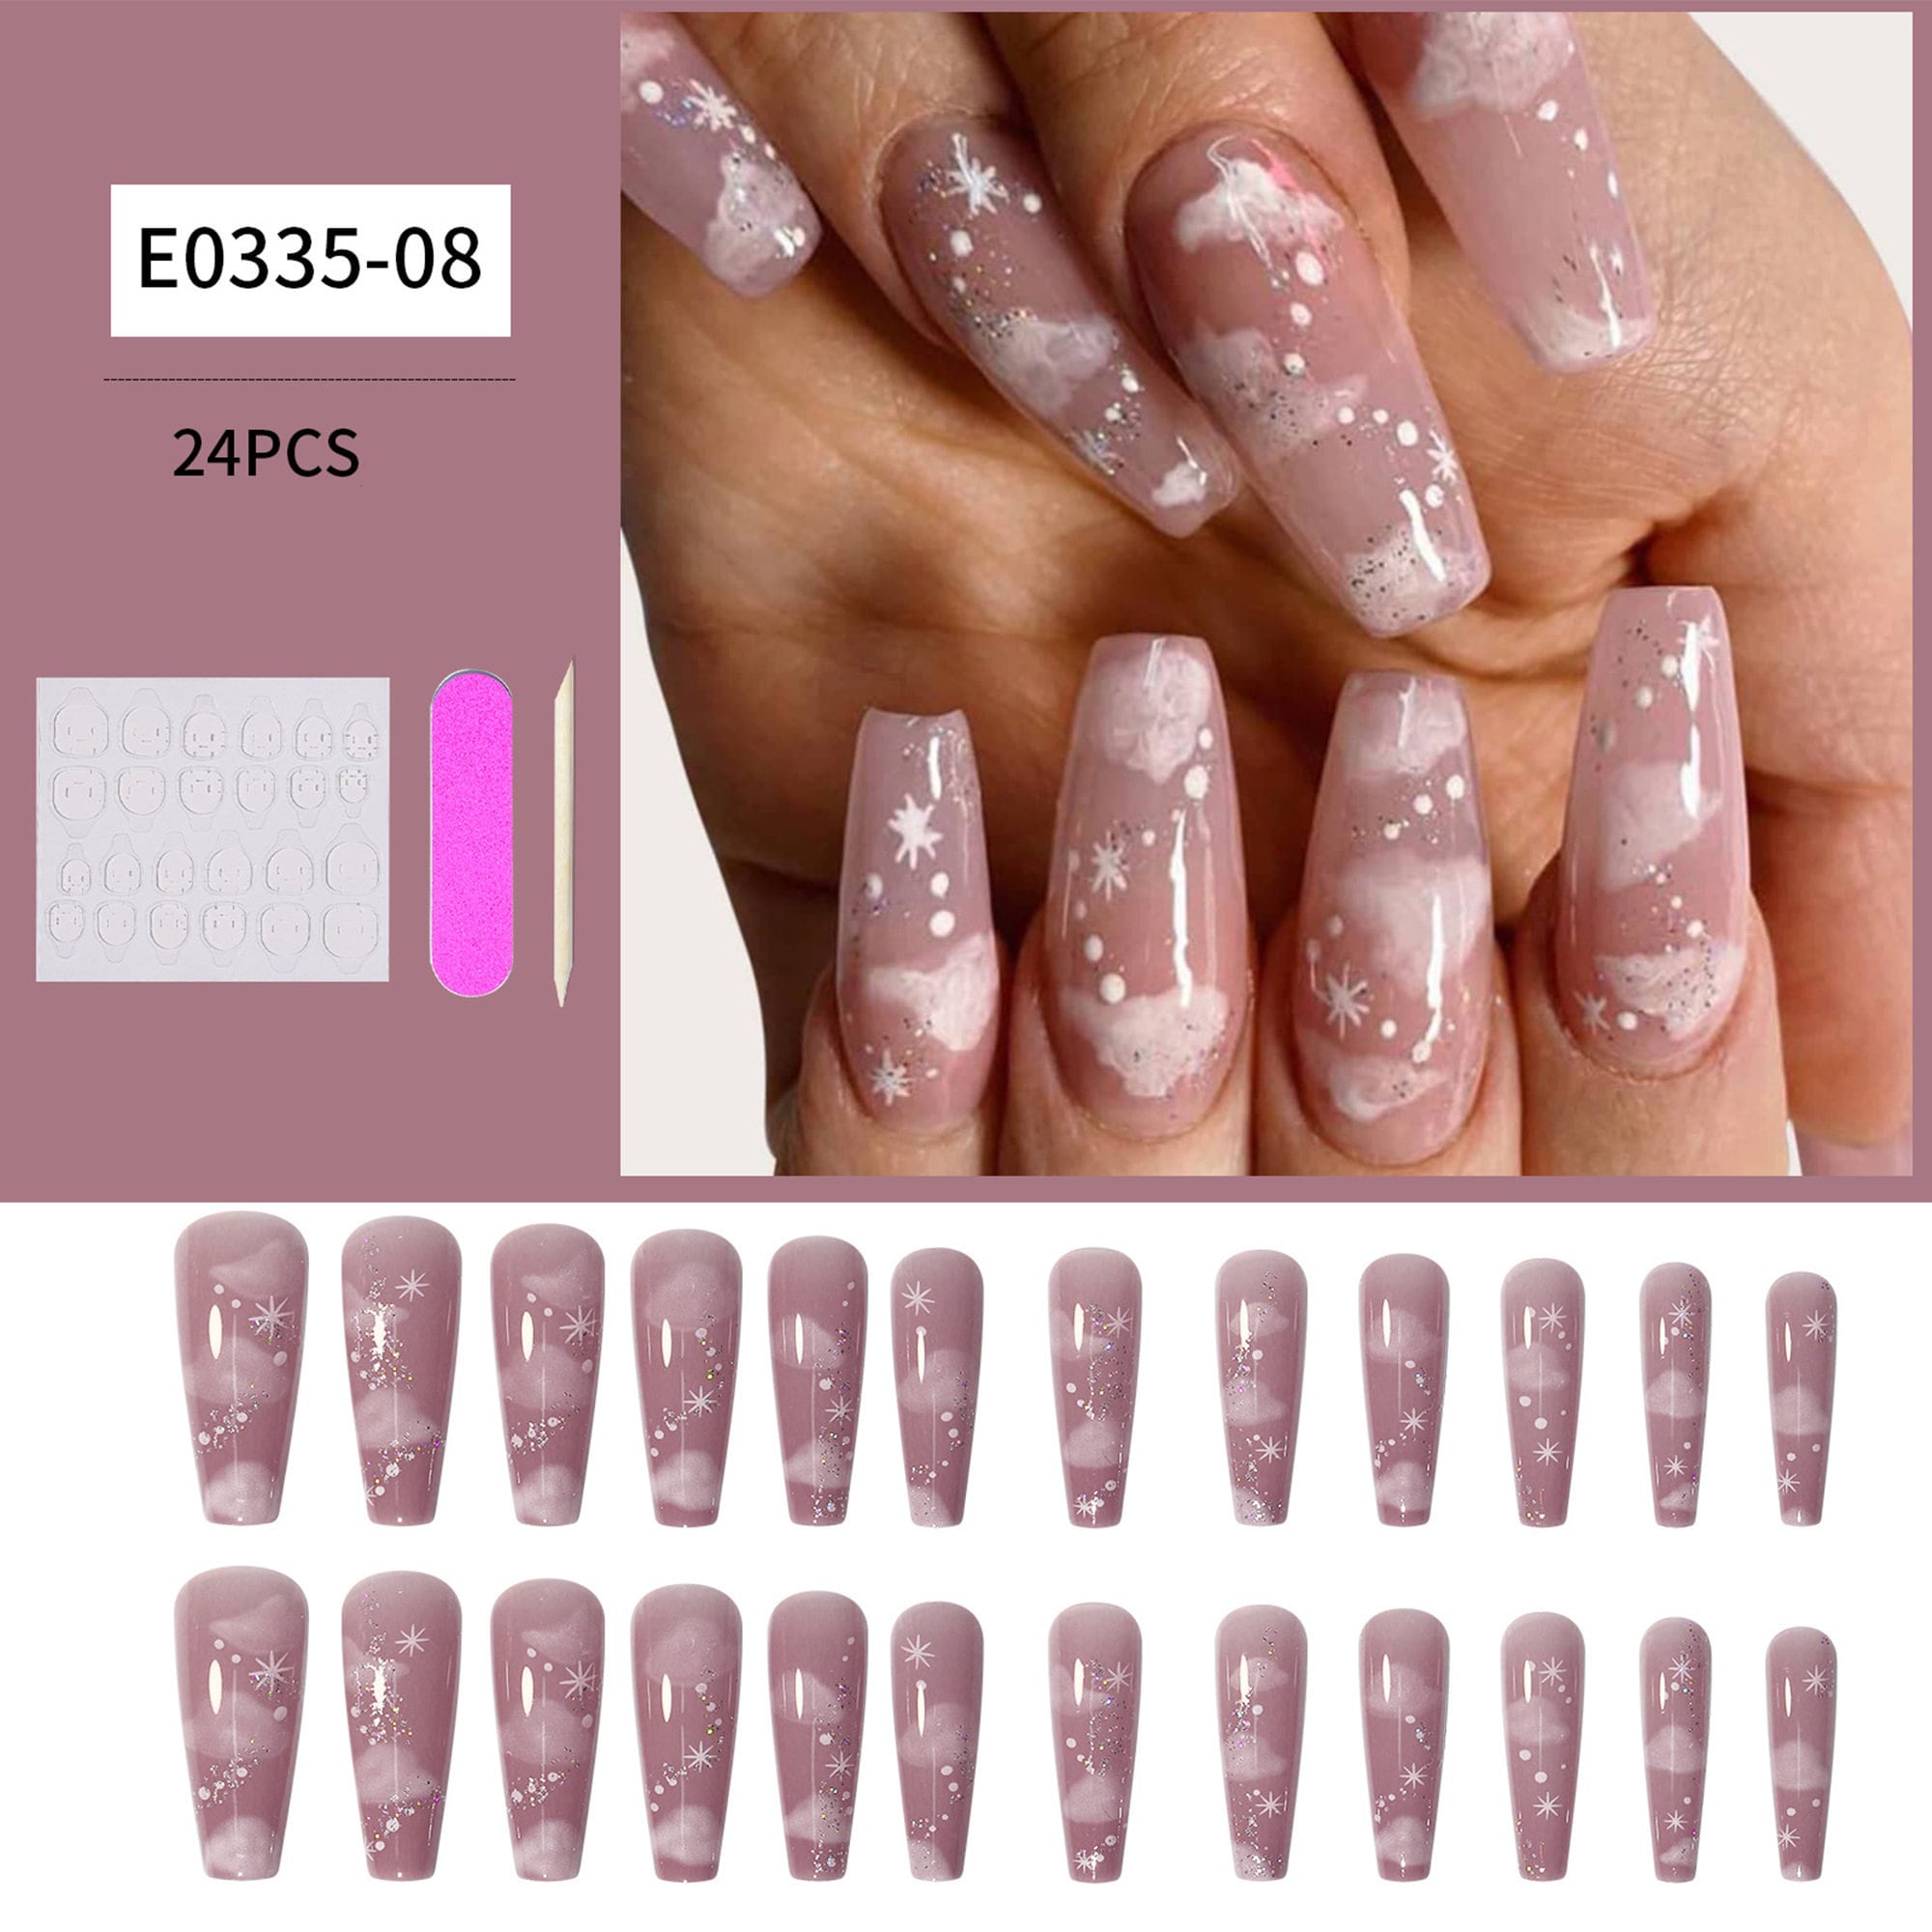 24pcs Complete gel nail kit Wholesale of Korean version of French